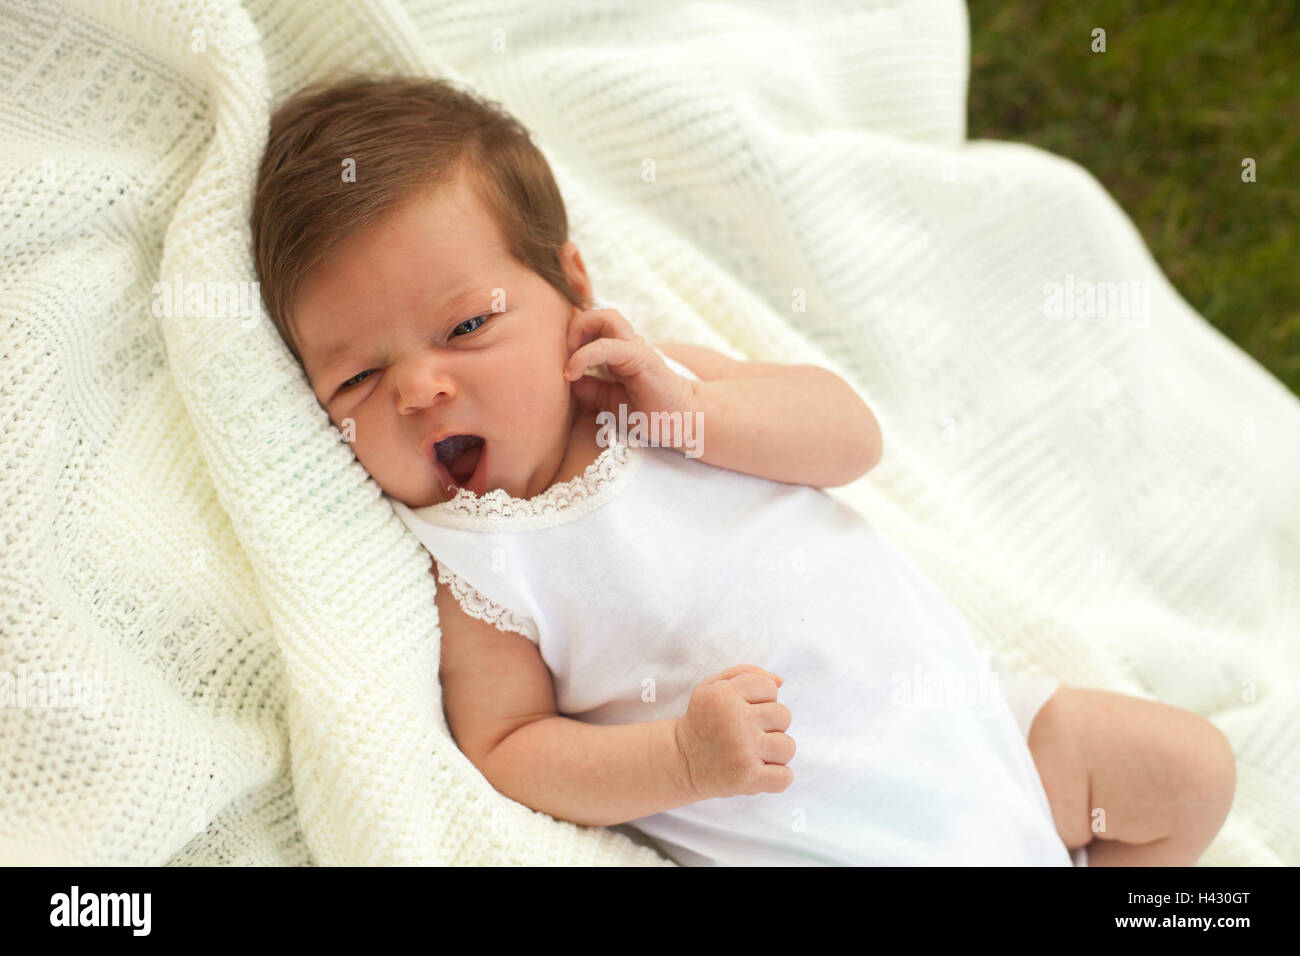 Baby yawing on the blanket on the grass Stock Photo